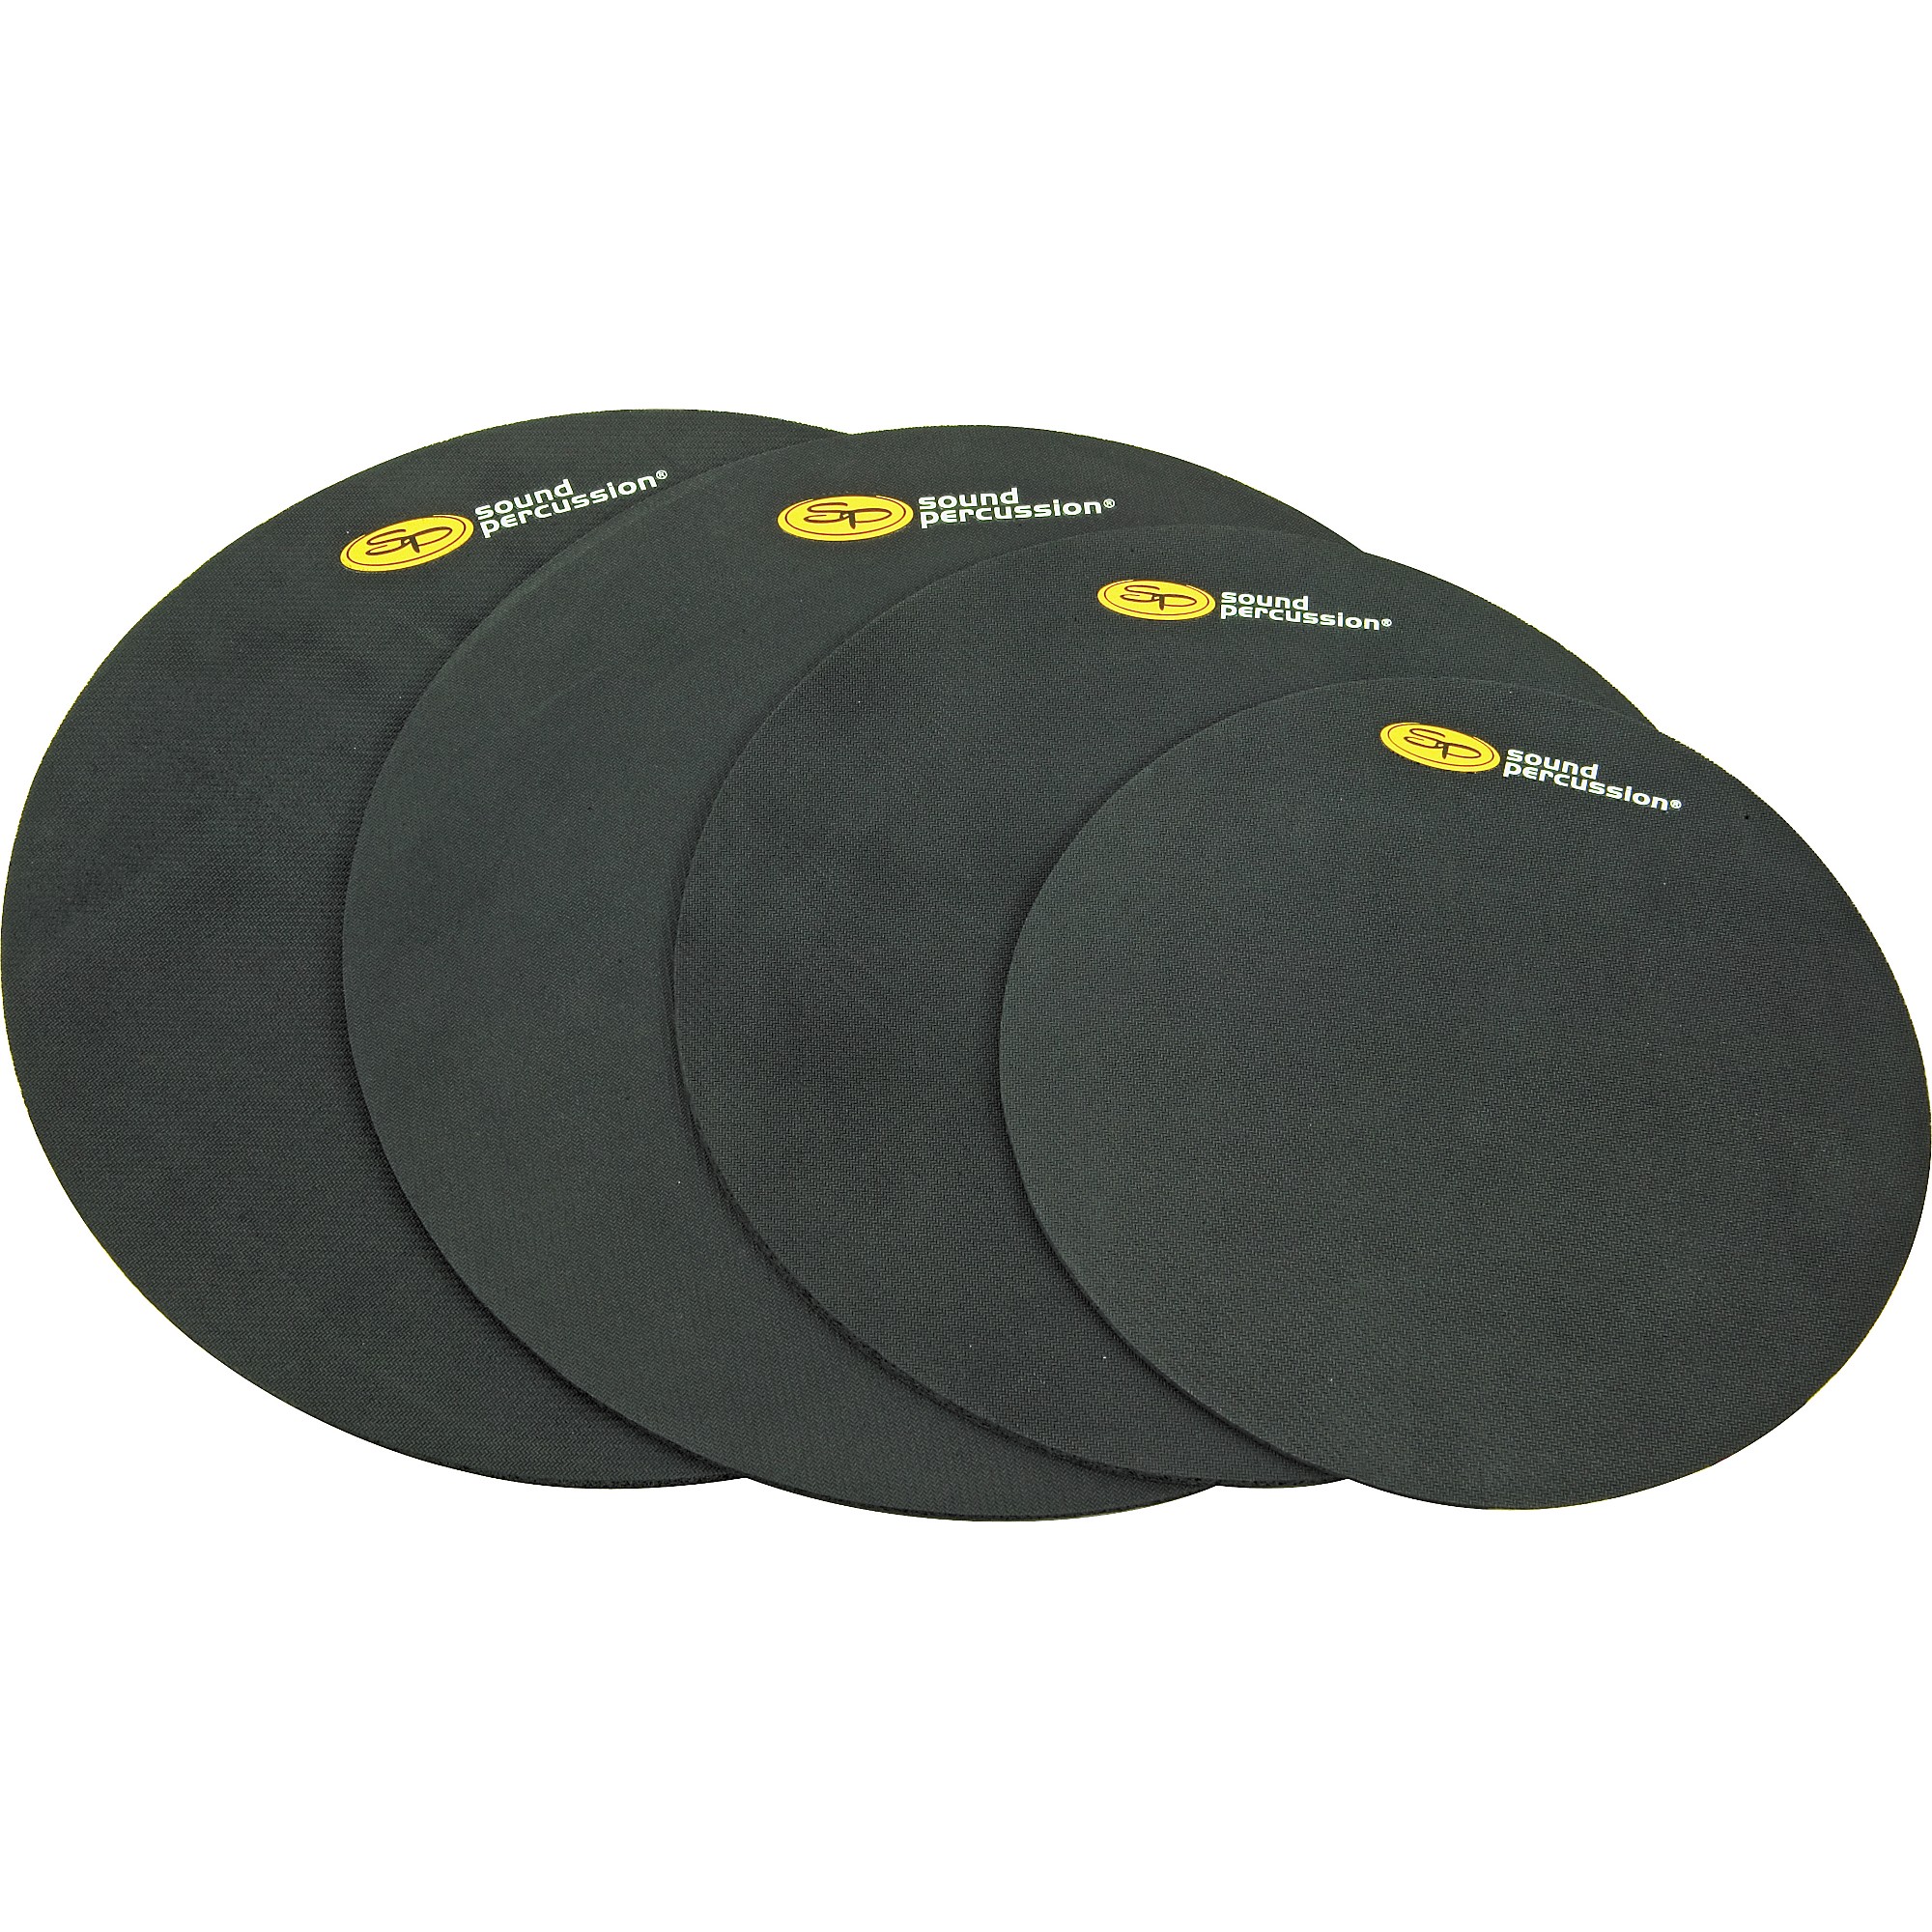 Rubber Practice Pad Set Mute Set Percussion Complete Drum Mute Set for Quiet Practice Soft Rubber Dampen Your Sound and Play for Hours TOPINCN Silencer Pads Set 